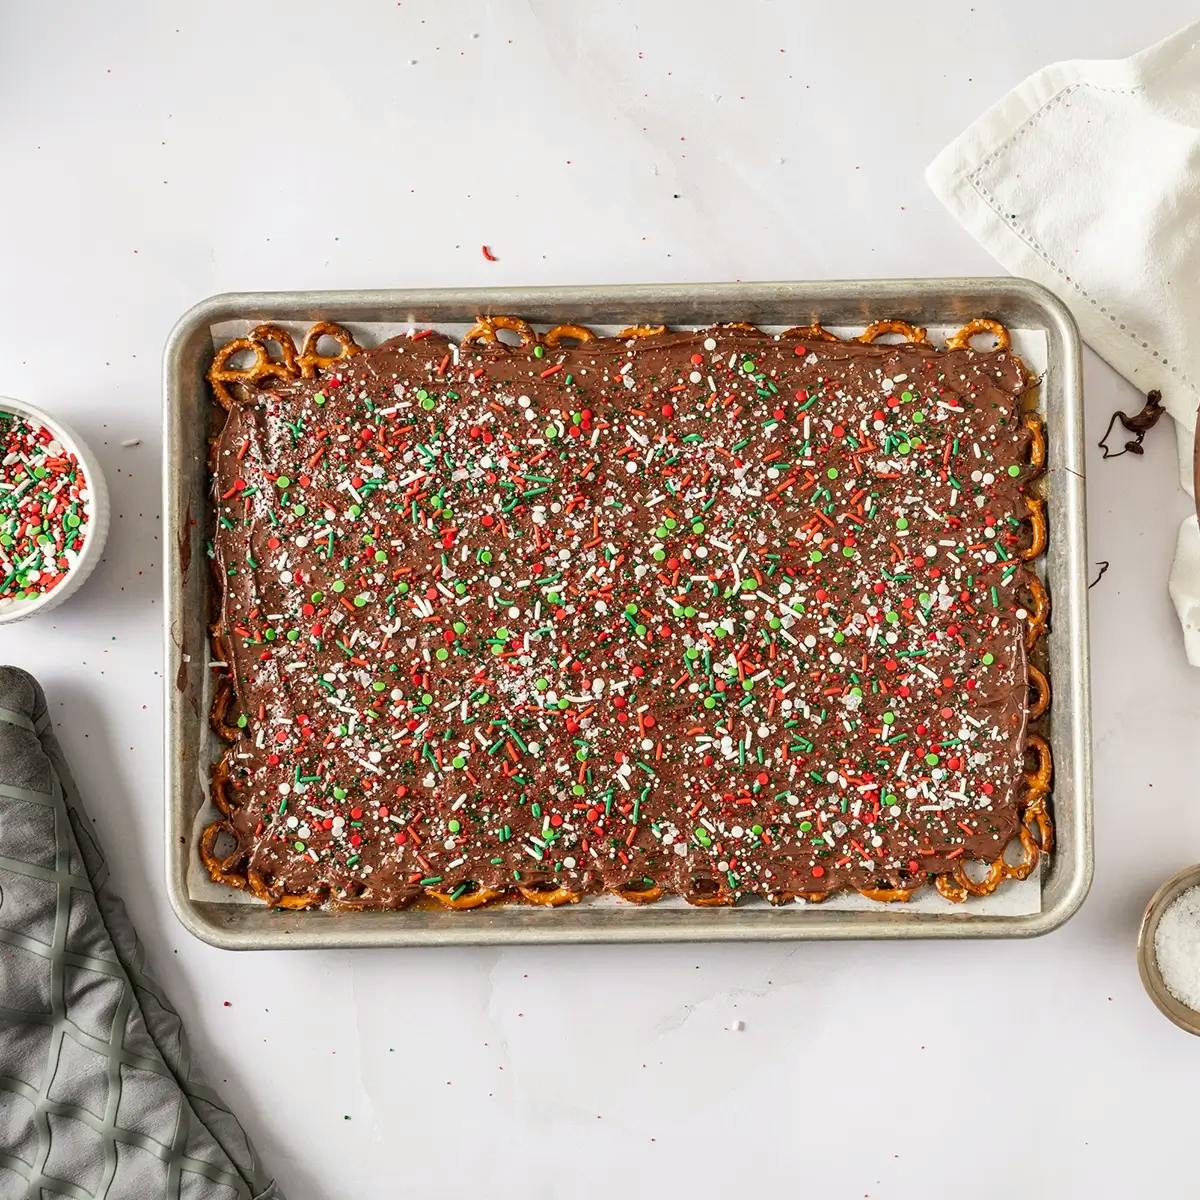 A tray of Christmas Crack with Pretzels, covered in sprinkles and left to cool.